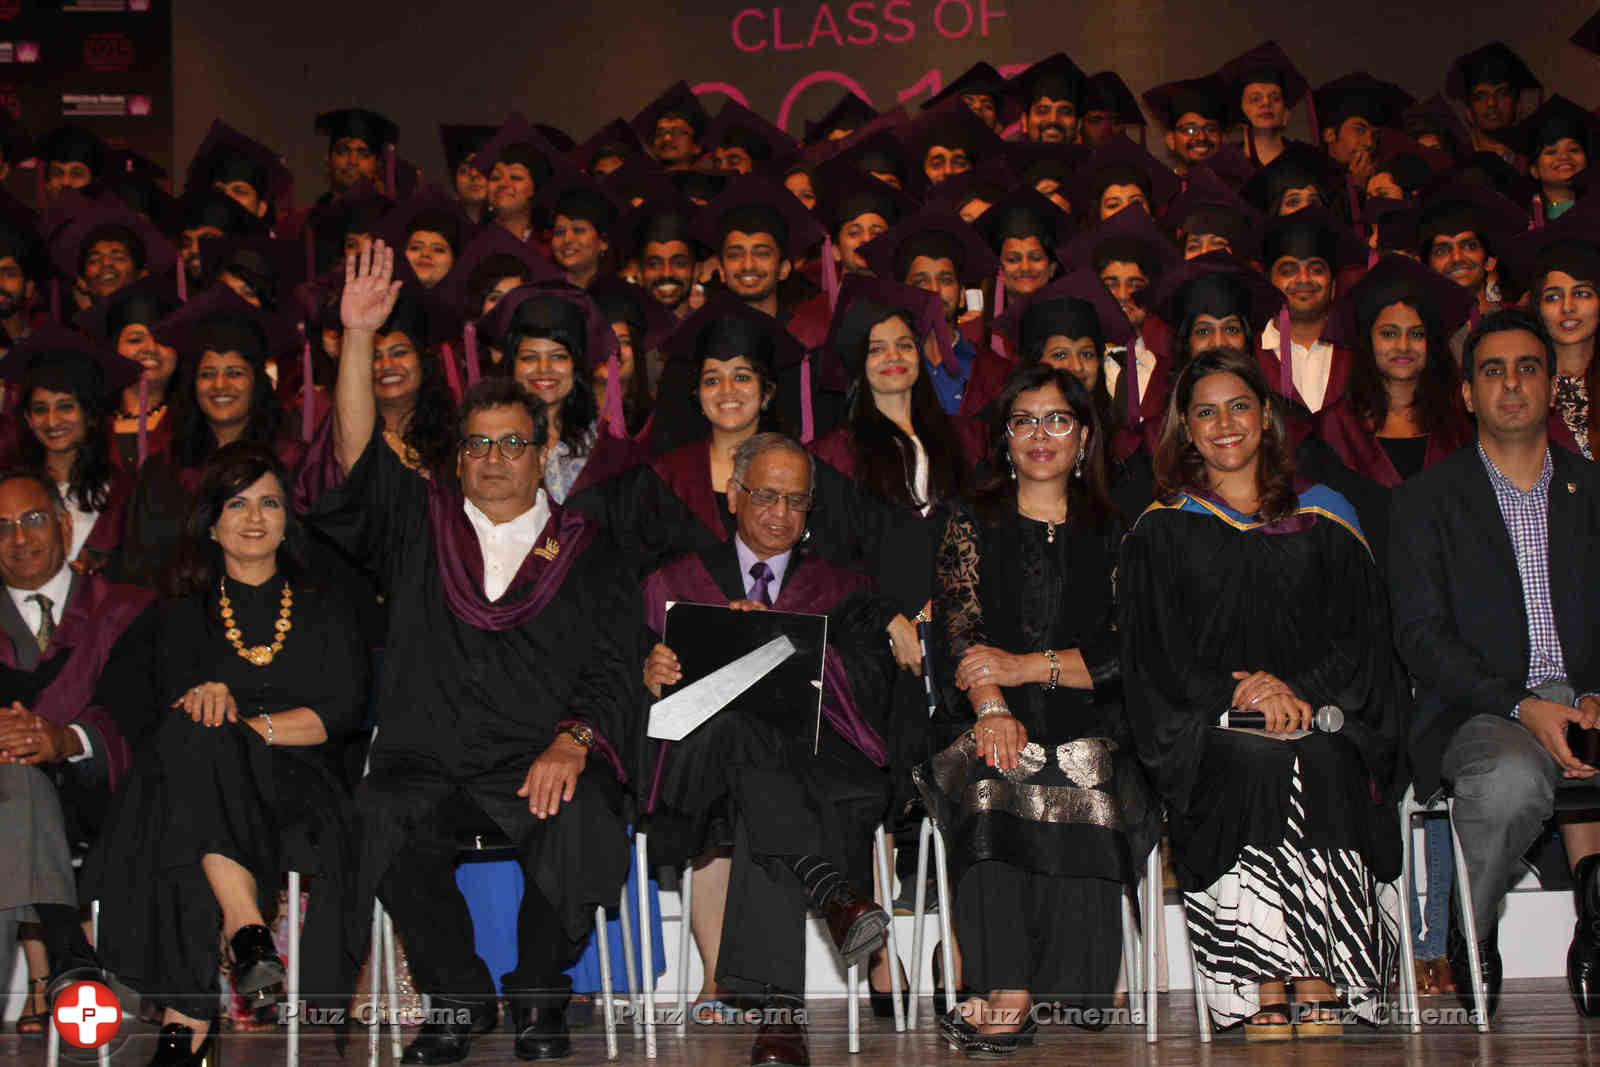 Esha Deol, Zeenat Aman among dignitaries at the convocation ceremony of WWI Photos | Picture 1065880